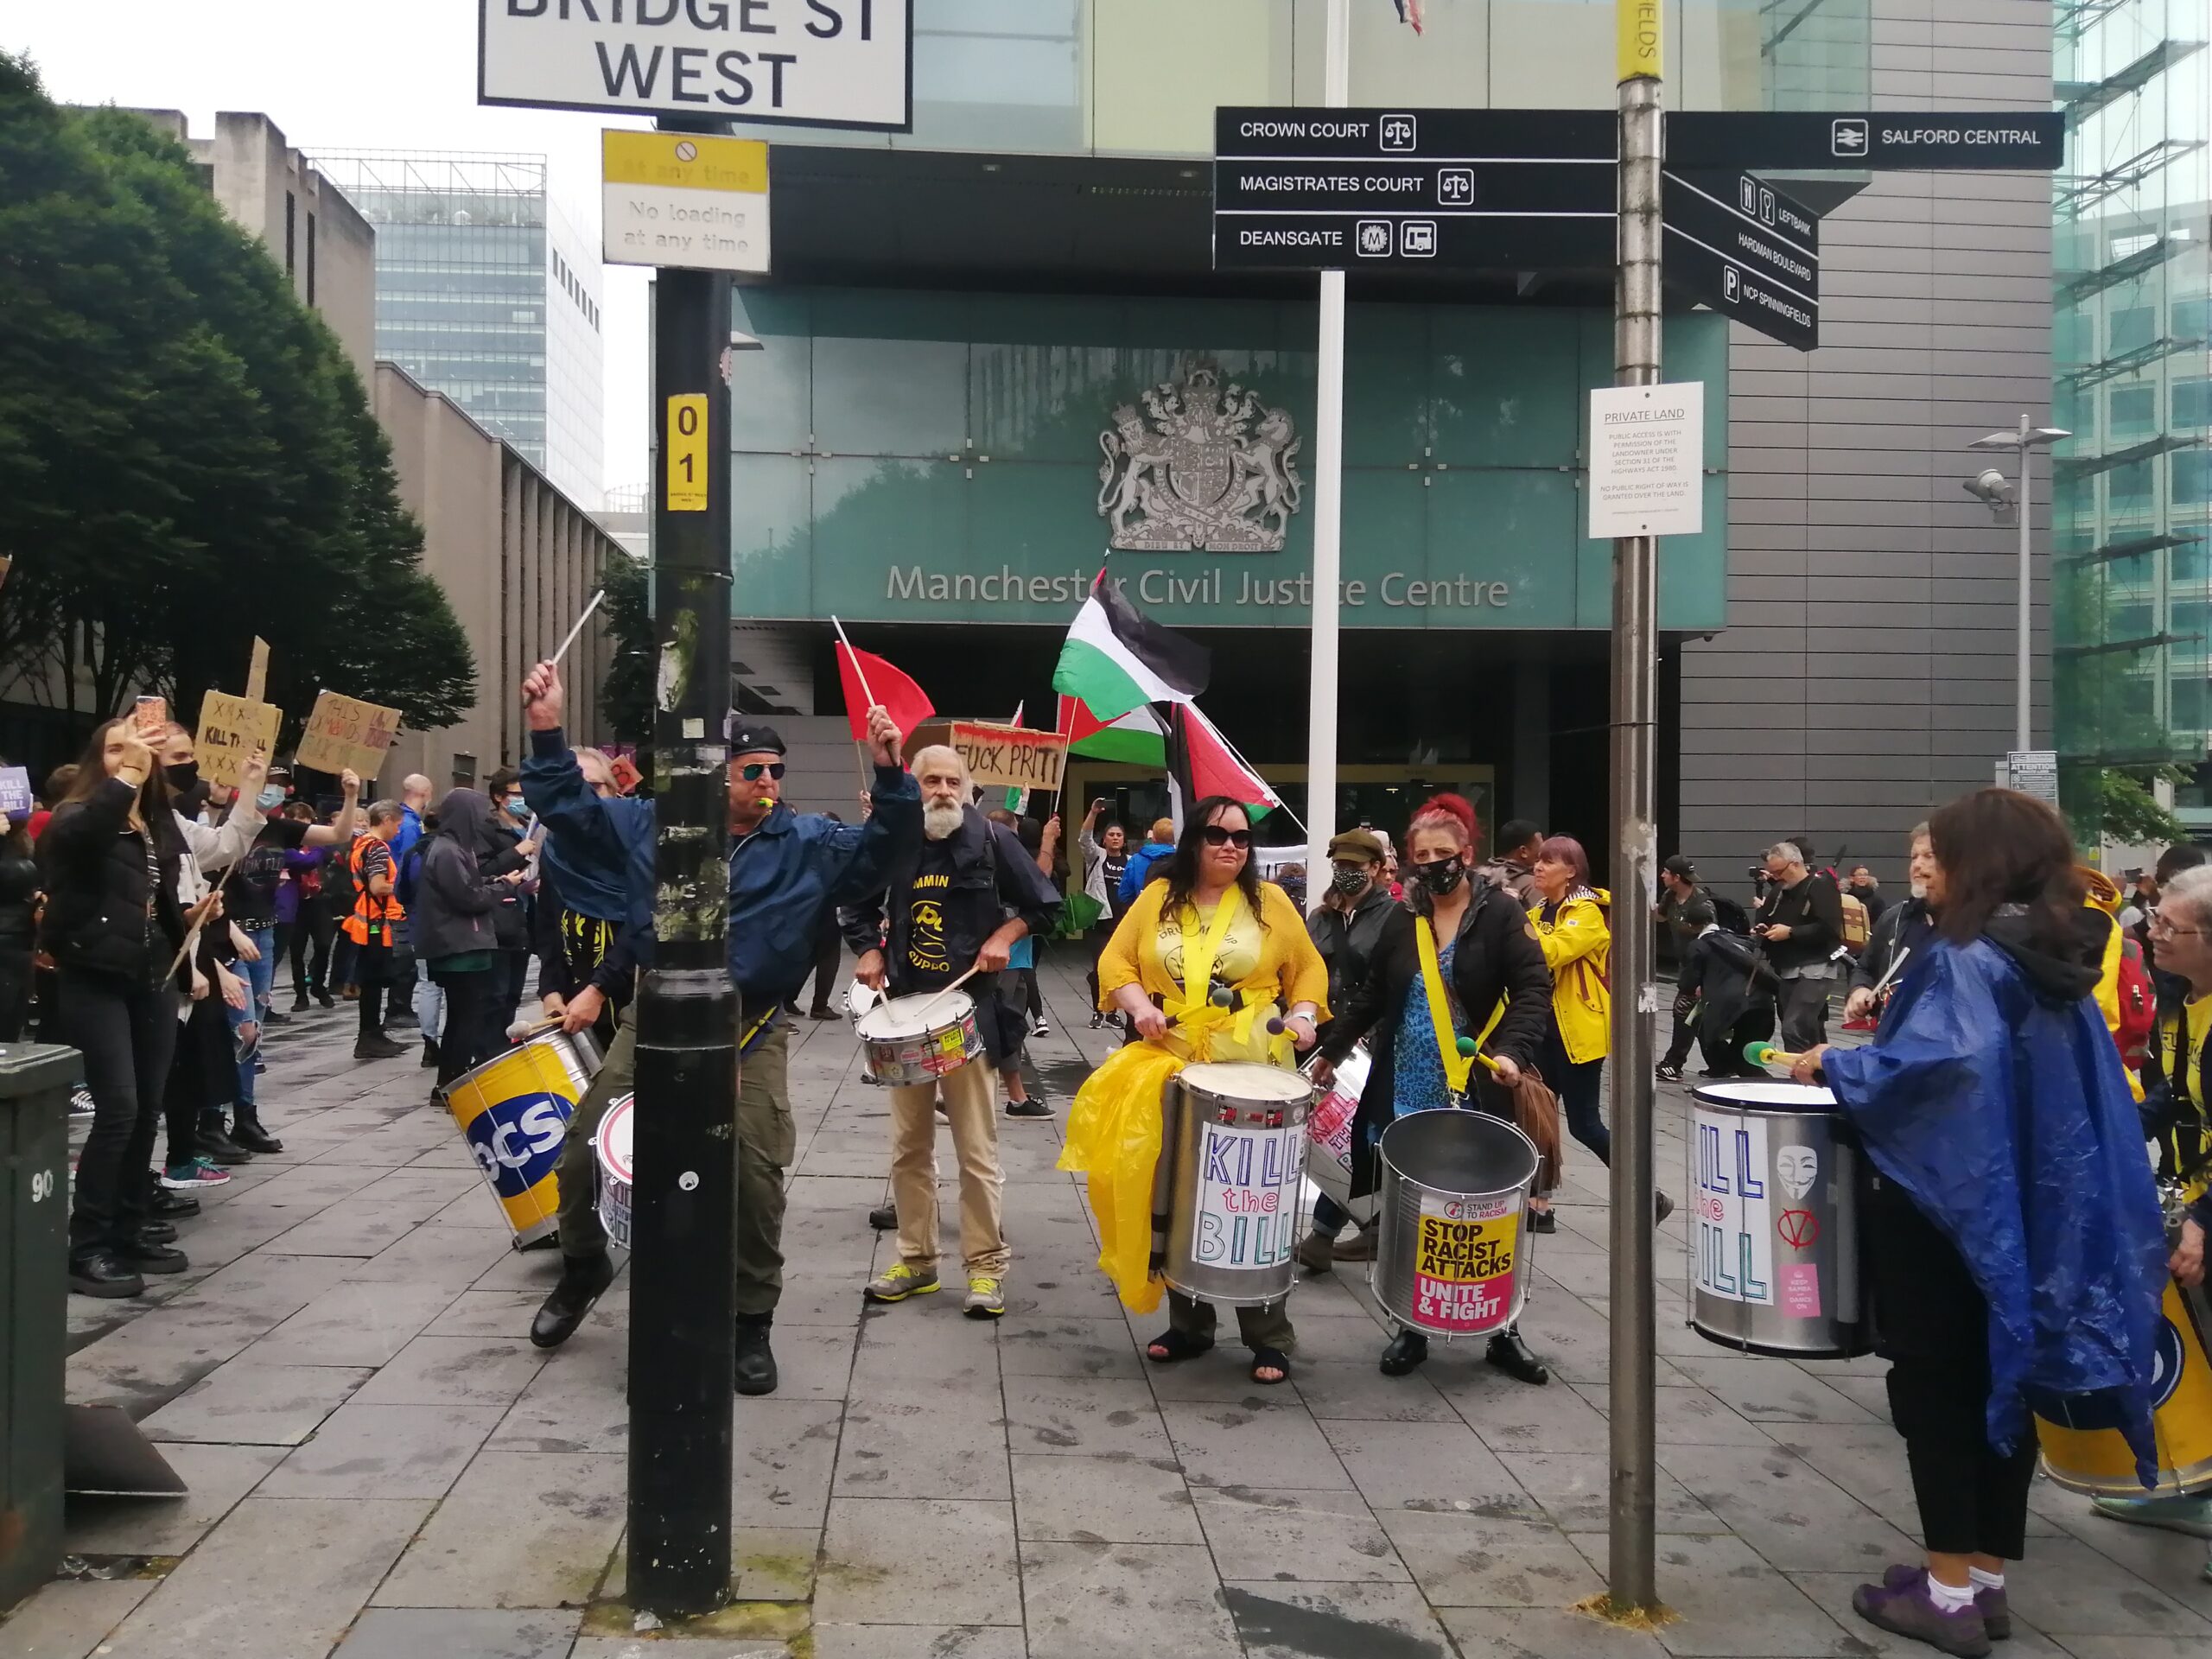 Photo shows the PCS Samba band outside the Manchester Civil Justice Centre playing drums, at a protest against the Police Bill 2021.